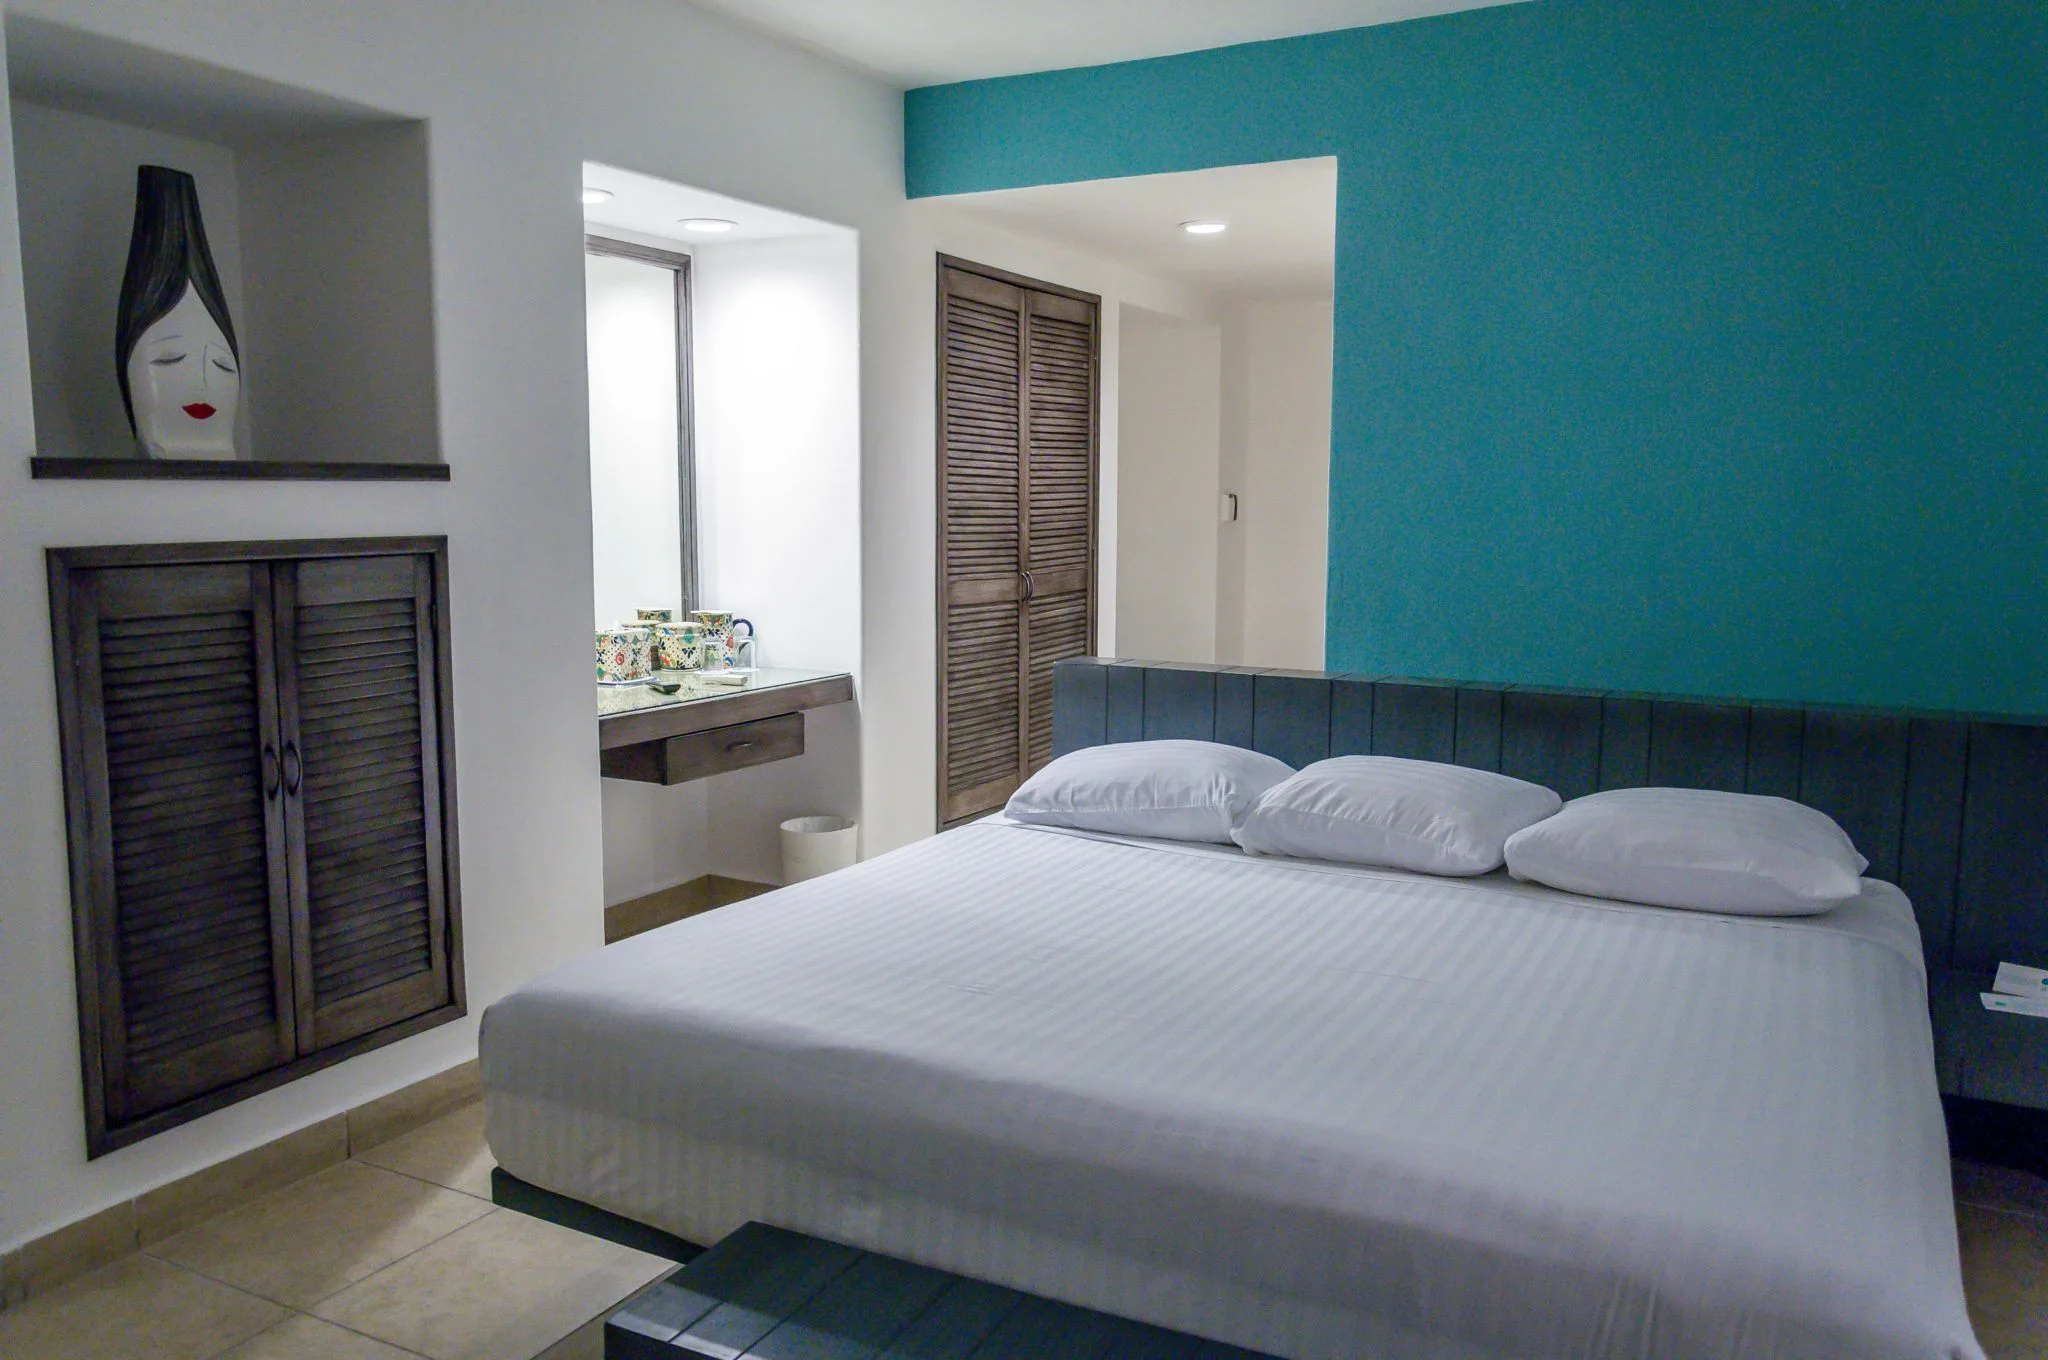 The bedrooms at the Hotel B Cozumel